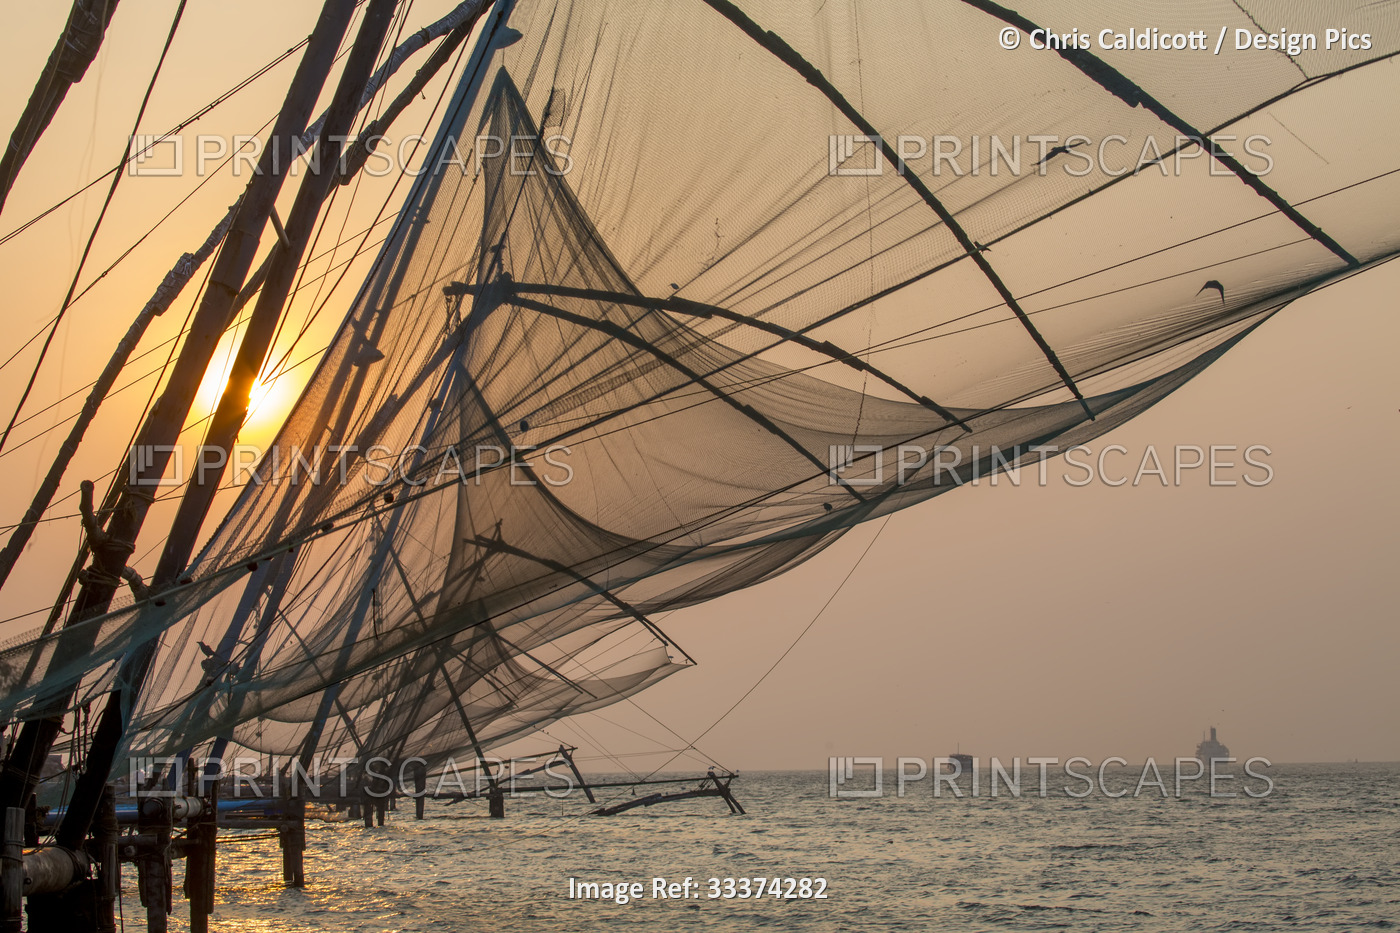 Traditional, 'Chinese' fishing nets at sunset in the mouth of the harbor; ...